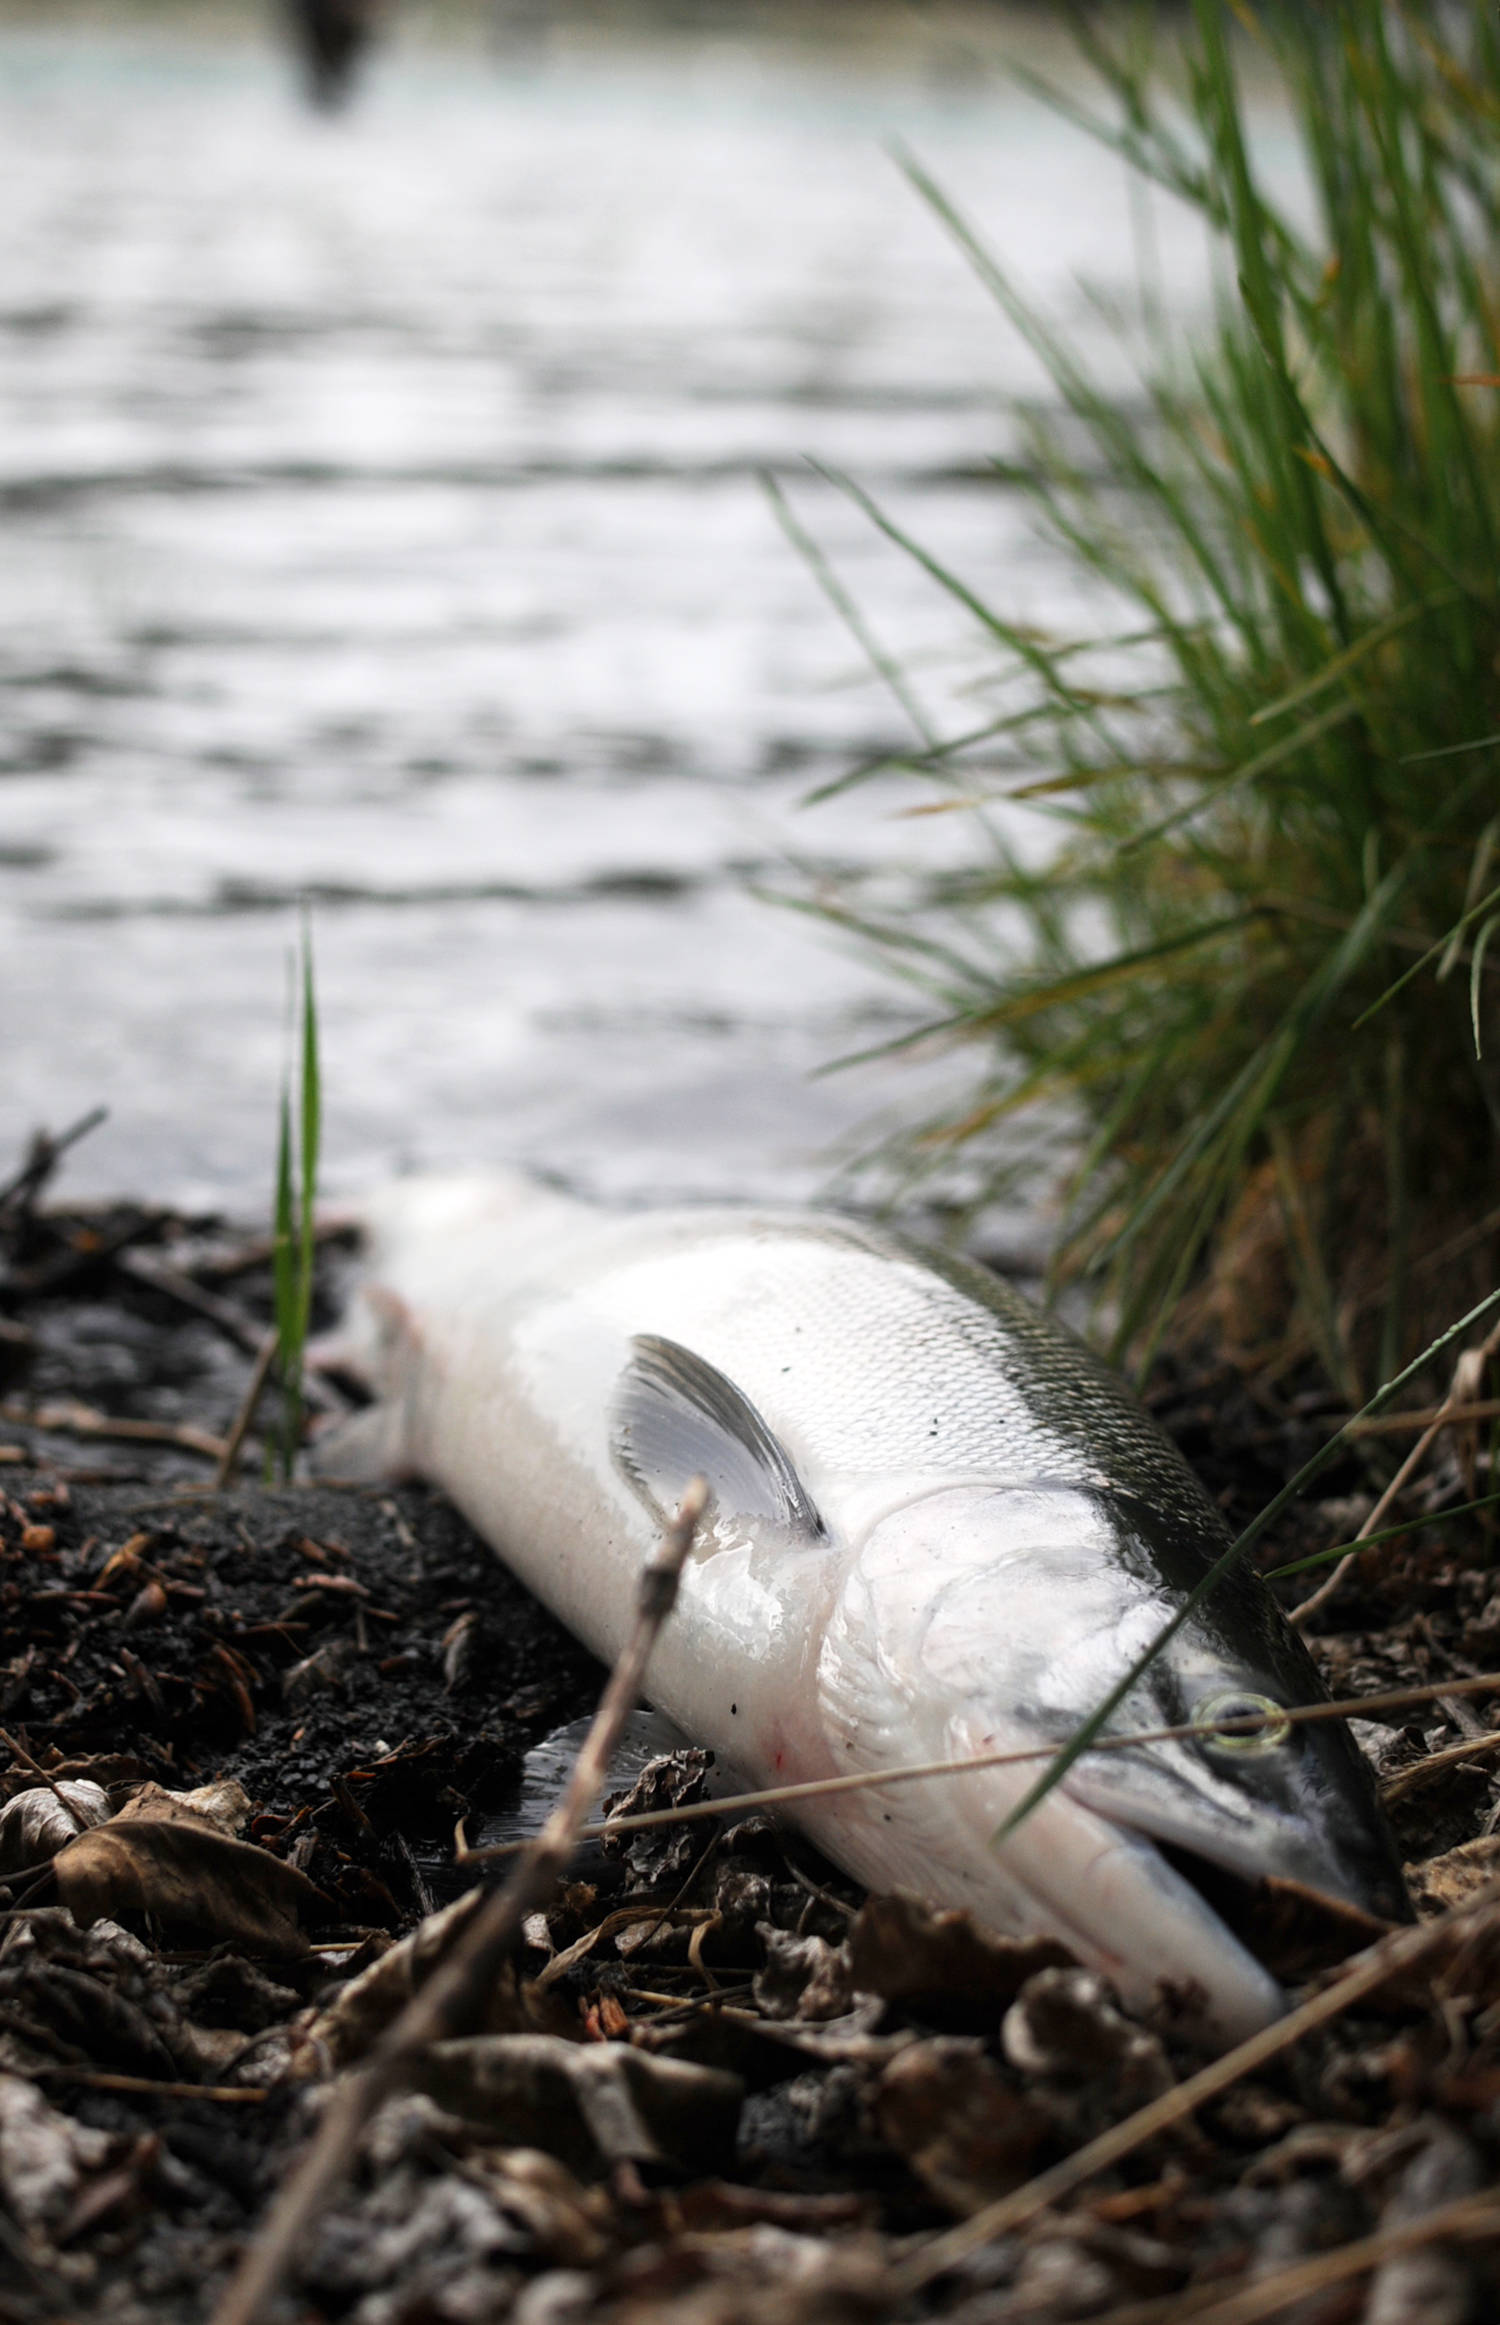 A sockeye salmon hooked by a lucky angler rests on the bank of the Kenai River downstream of the confluence with the Russian River on Sunday, June 11, 2017 near Cooper Landing, Alaska. Sunday was the first opening for the popular Russian River sockeye salmon sportfishery, and by midmorning, many anglers were already packing out their limits of salmon while others pulled in their catches. As of Saturday, the Alaska Department of Fish and Game’s weir on Lower Russian Lake had counted 1,027 sockeye, more than triple the 274 that had passed the weir as of the same date in 2016. (Elizabeth Earl/Peninsula Clarion)